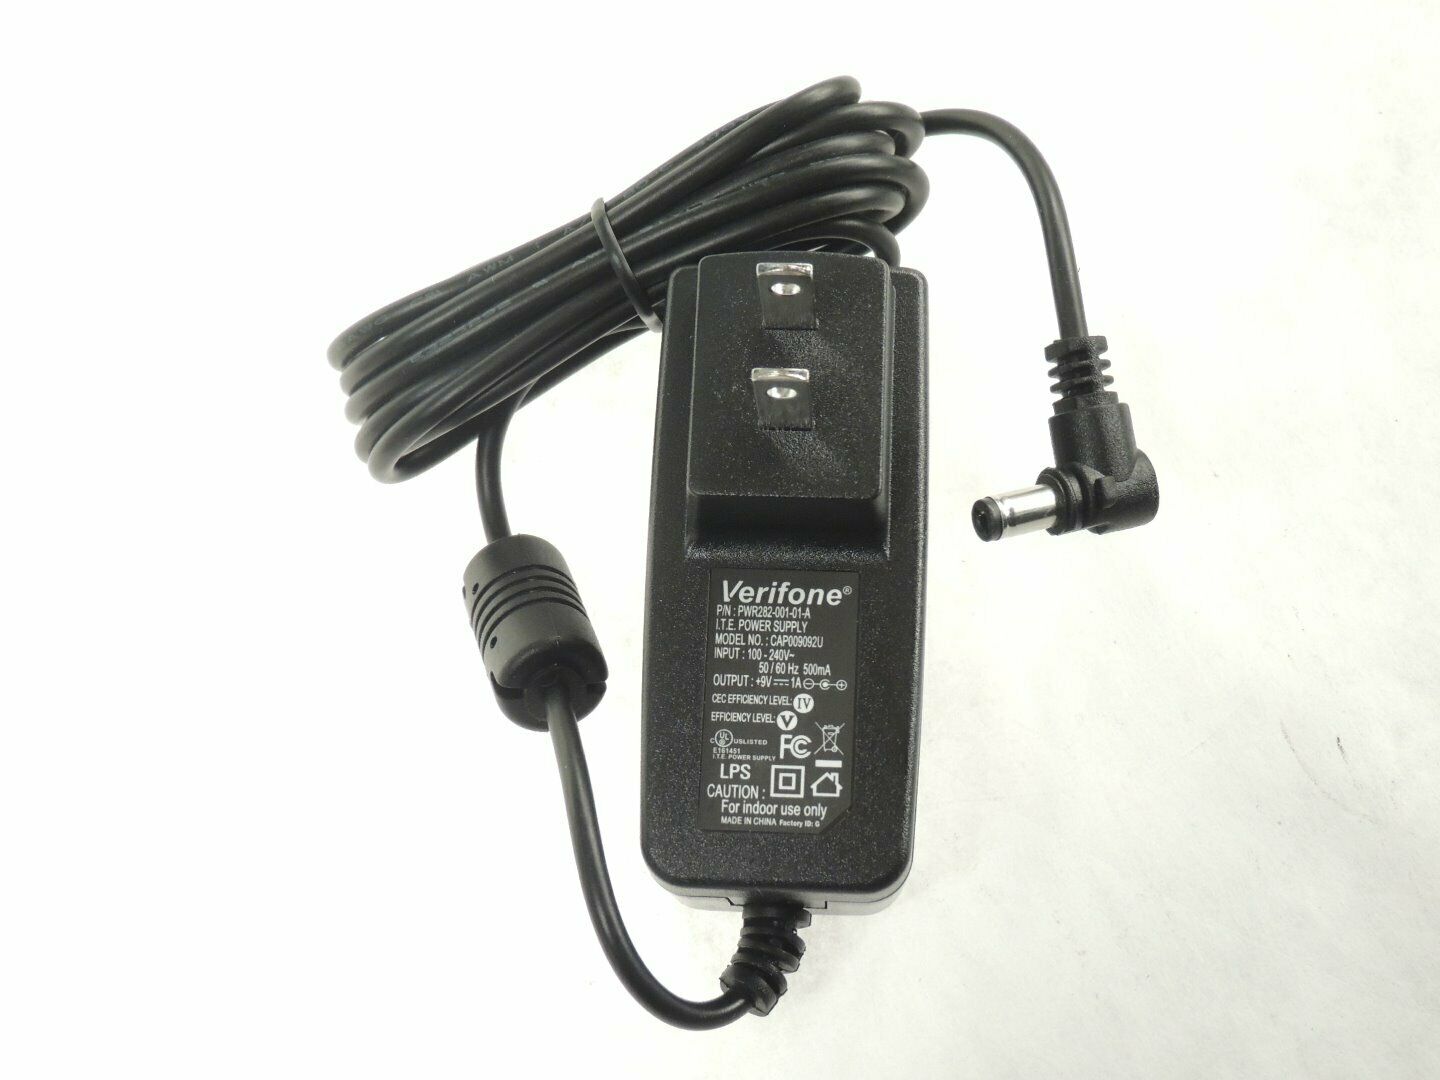 *NEW* Verifone 9VDC 1A PWR282-001-01-A POWER SUPPLY for Verifone VX 805 820 Credit Card Terminal